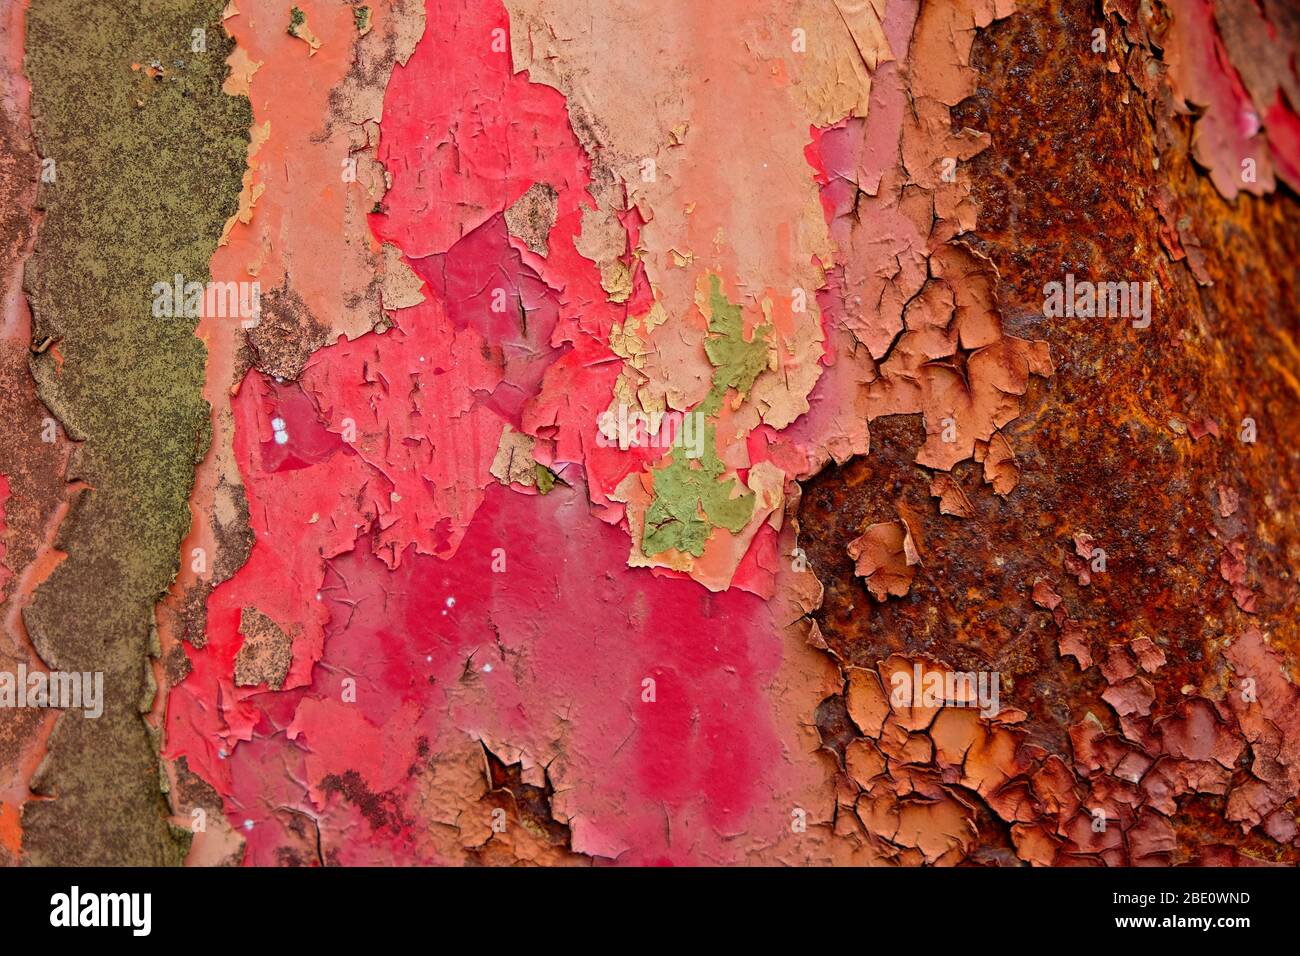 Multiple layers of flaking paint on a metal surface with severe rusting. Stock Photo